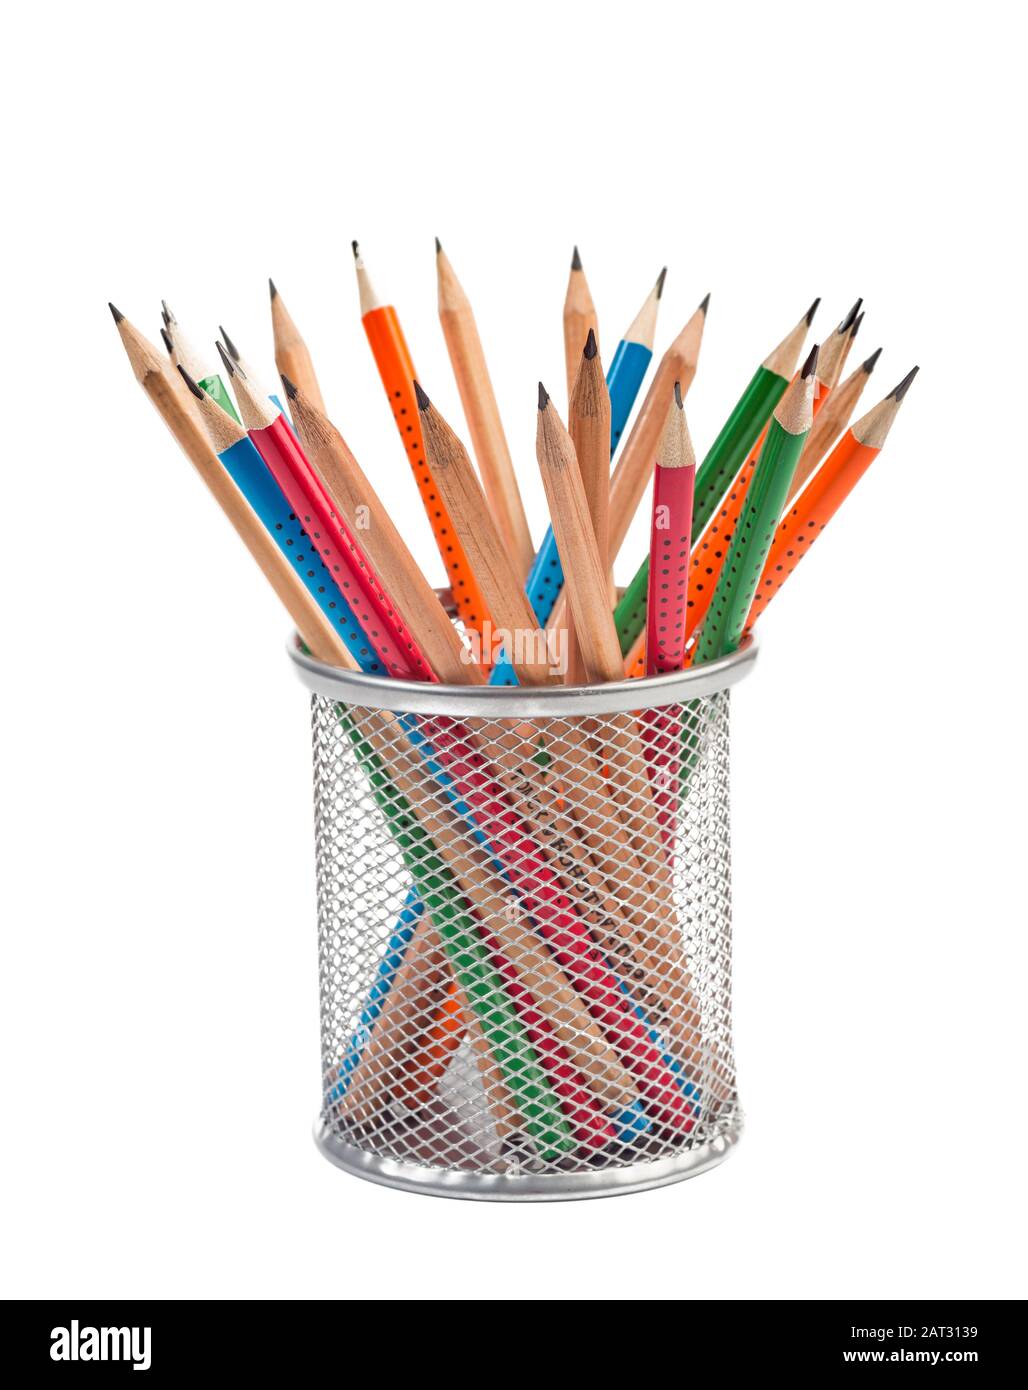 Pencils in metal basket isolated on white background Stock Photo